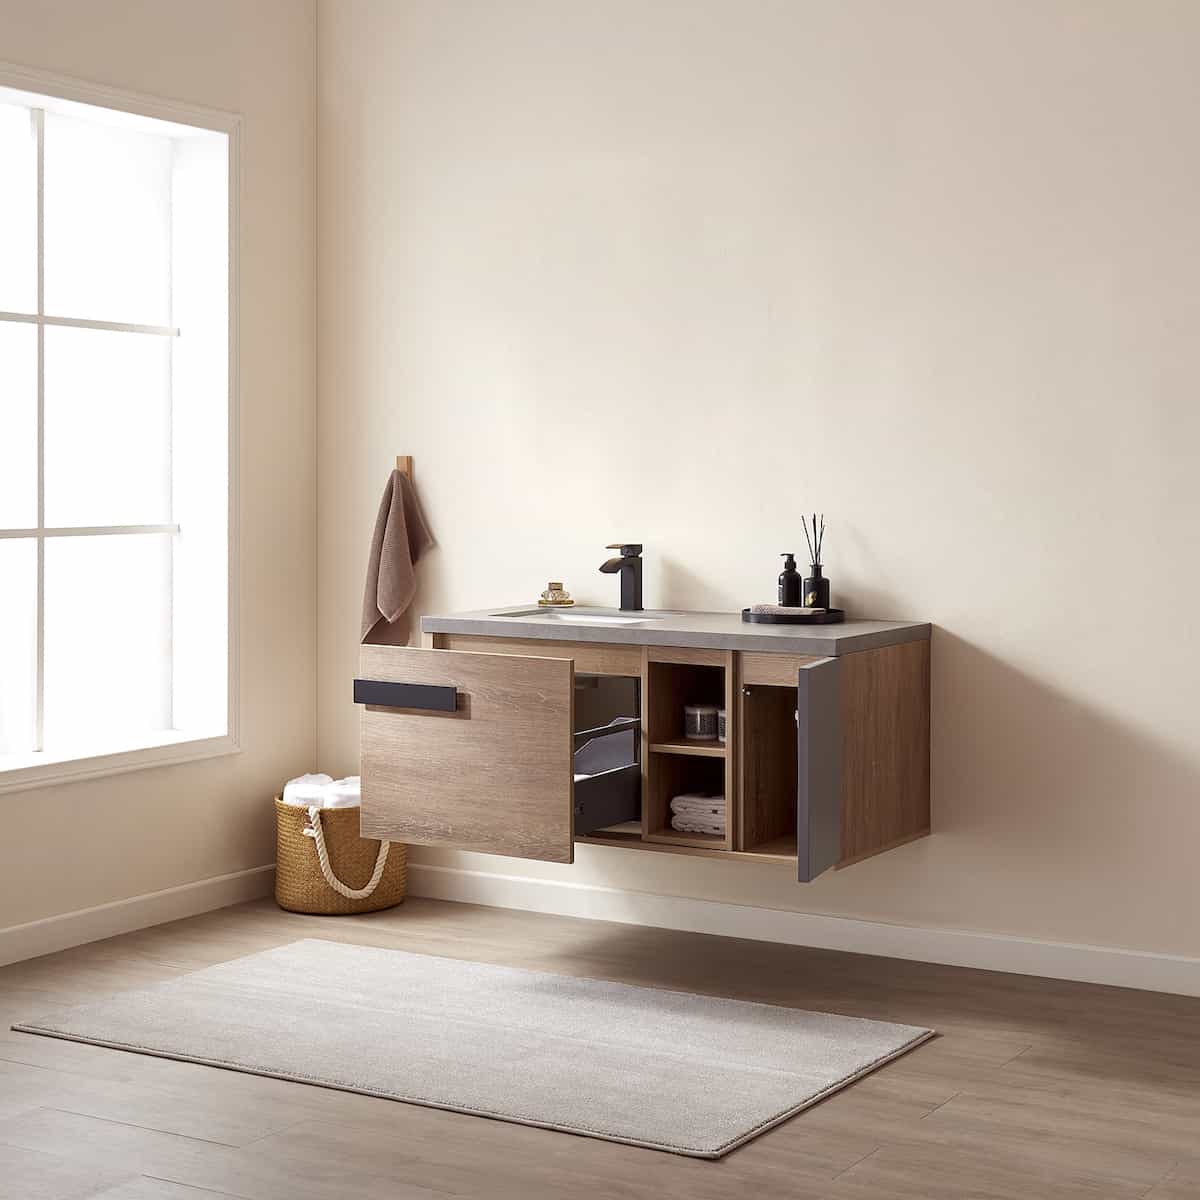 Vinnova Carcastillo 47 Inch Wall Mount Single Vanity in North American Oak with Grey Sintered Stone Top Without Mirror Inside 703247-NO-WK-NM